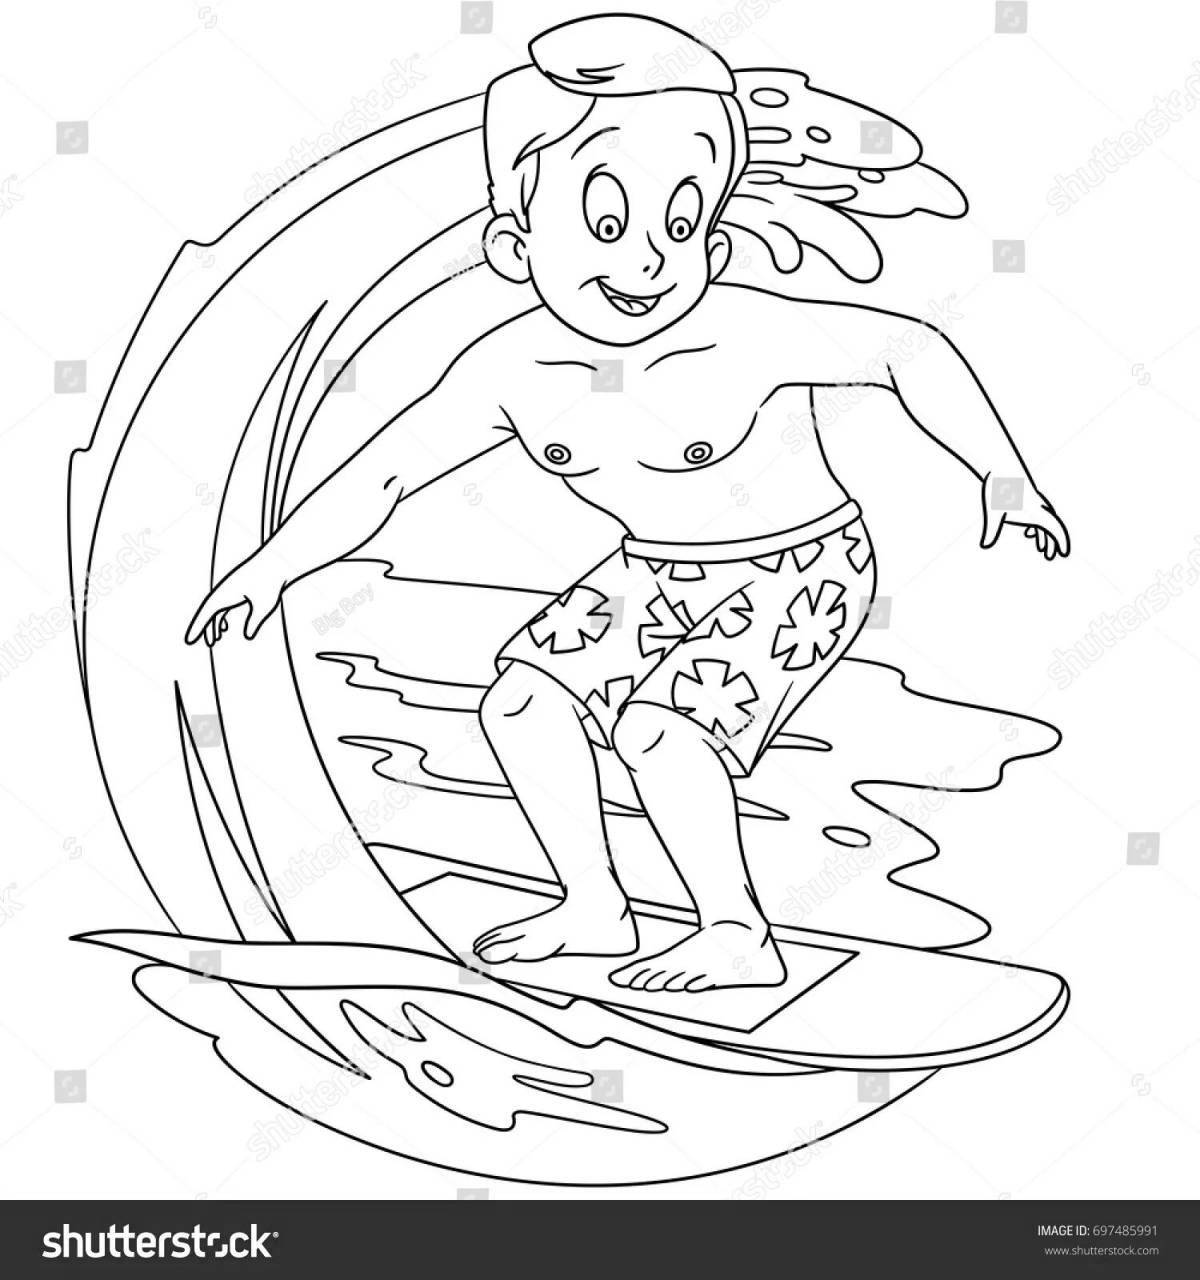 Surf live coloring page